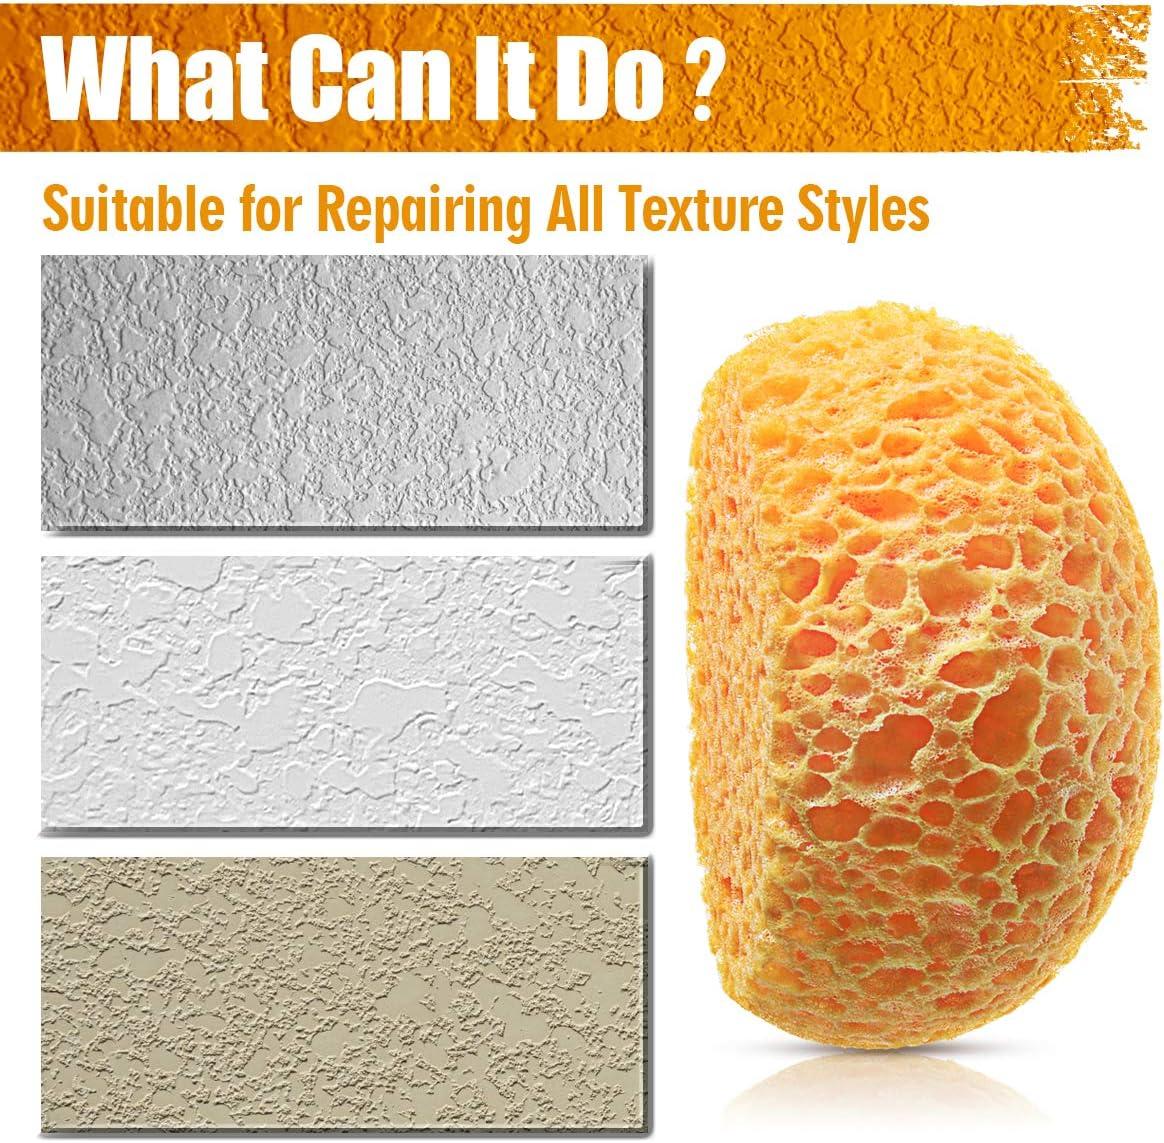 Knockdown Texture Sponge Wall Patch Drywall Patch/Repair Texture Patch  Sponge Home Decor Sponge for DIY Painting Ceiling Wall Texture - 2 Pcs